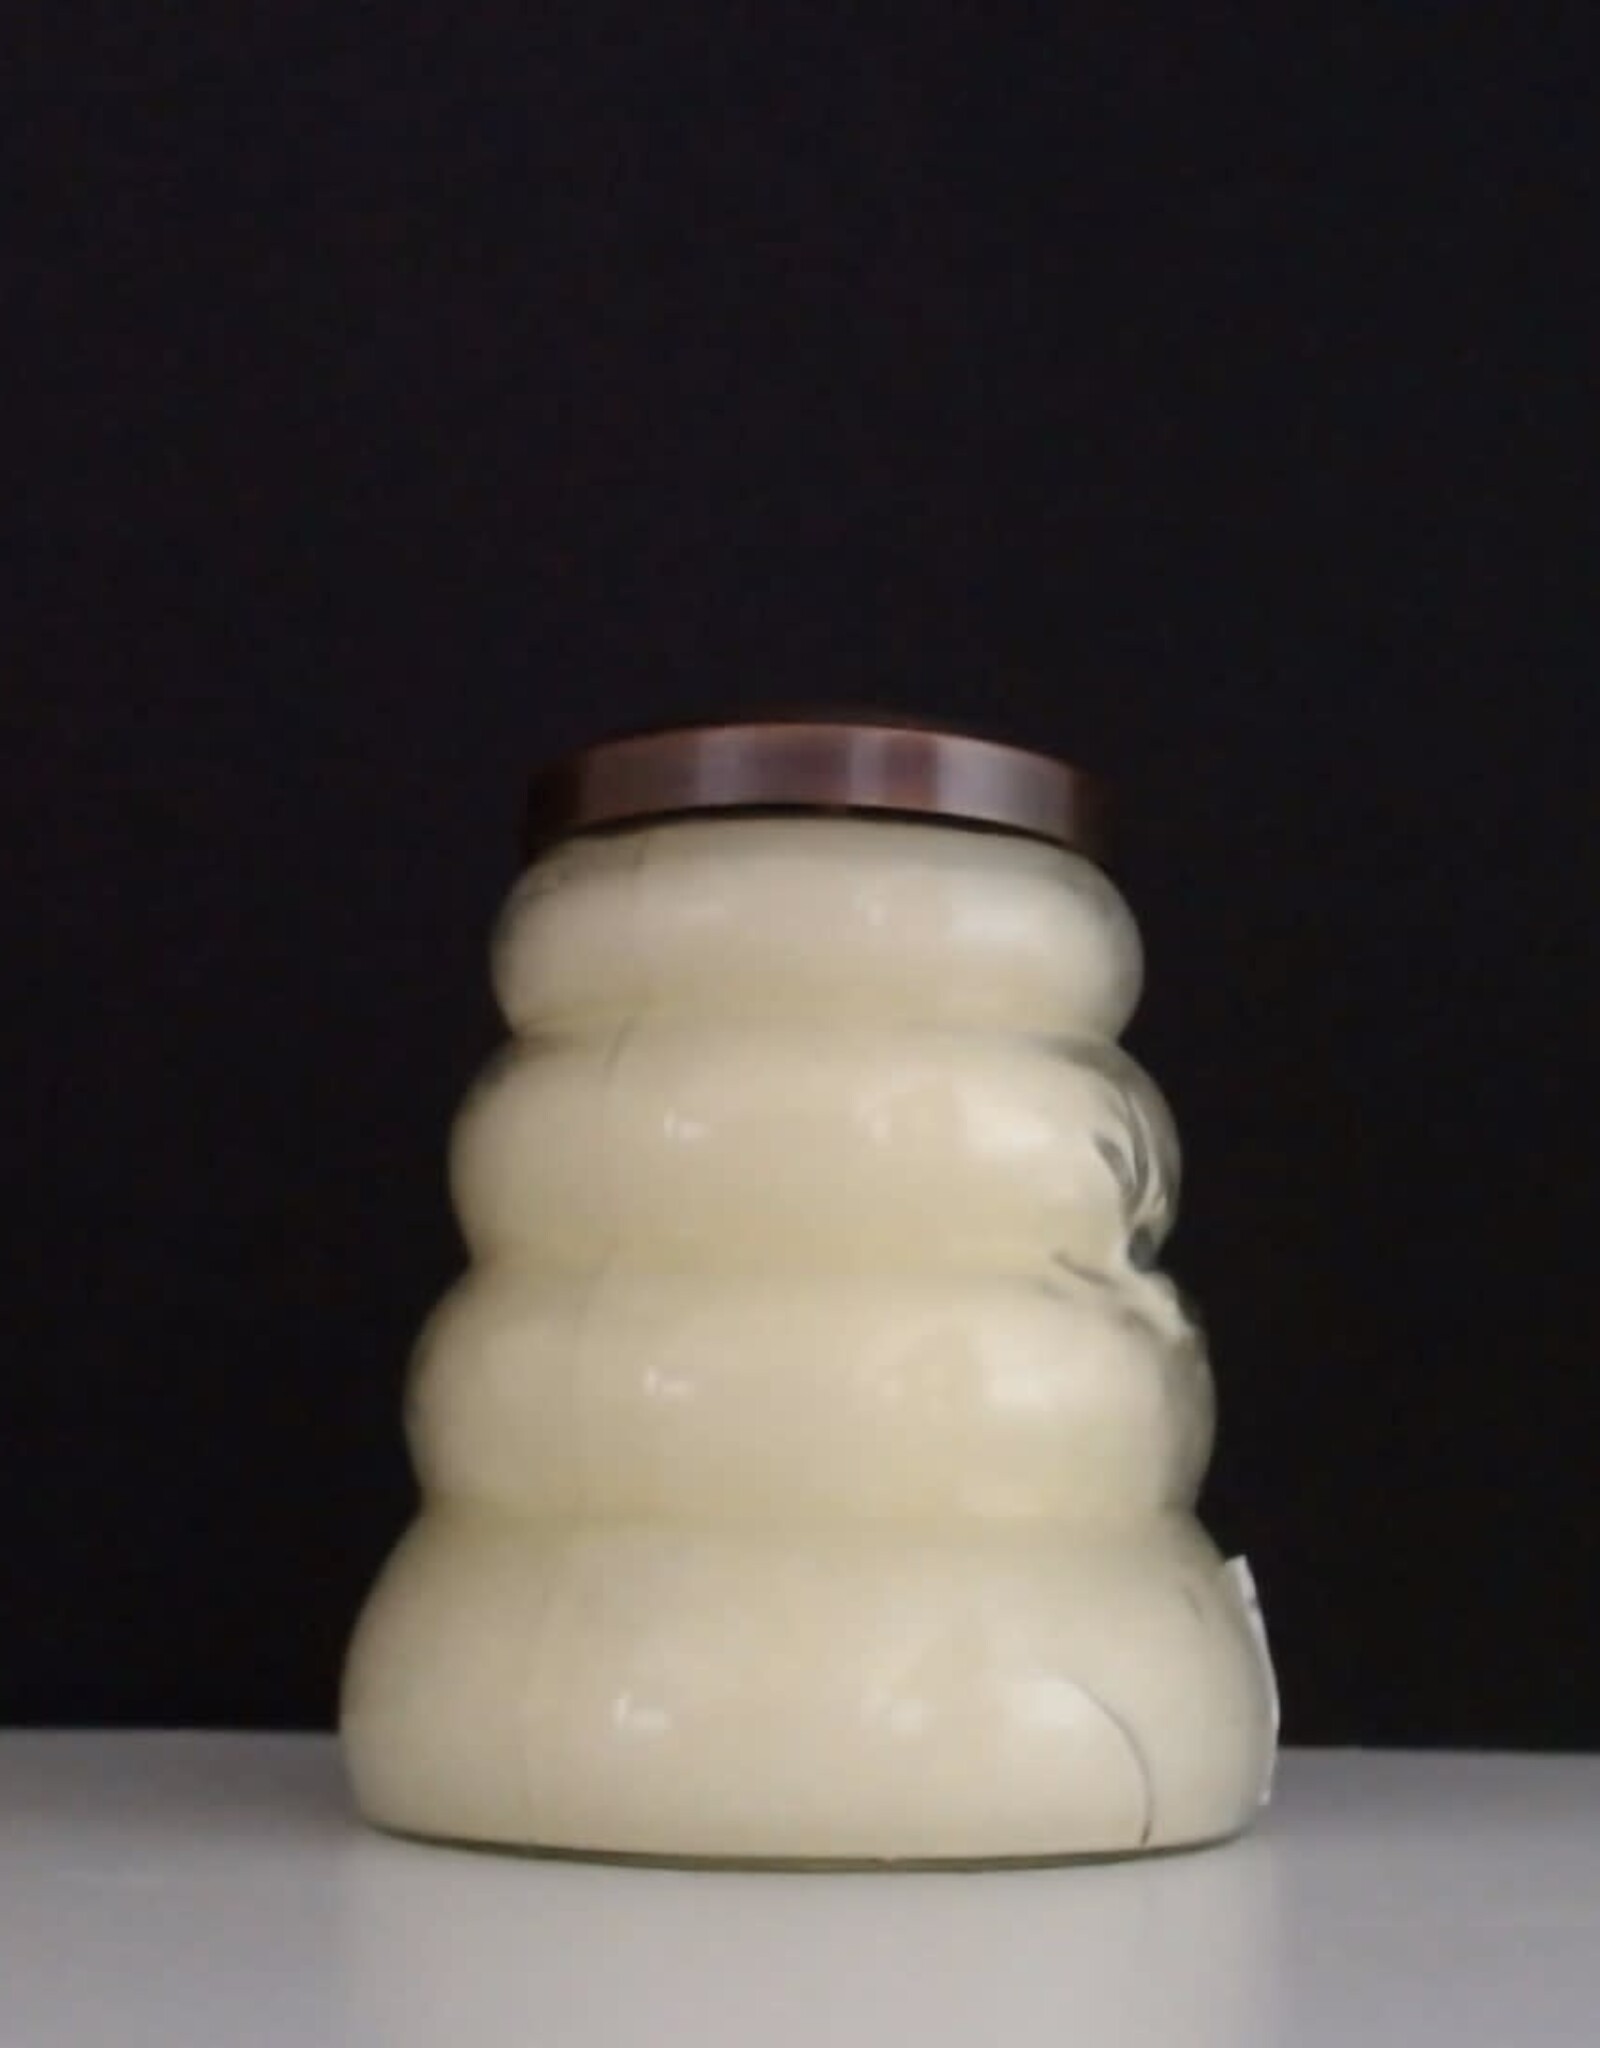 Cheerful Giver Honey Apple Beehive Candle 14oz